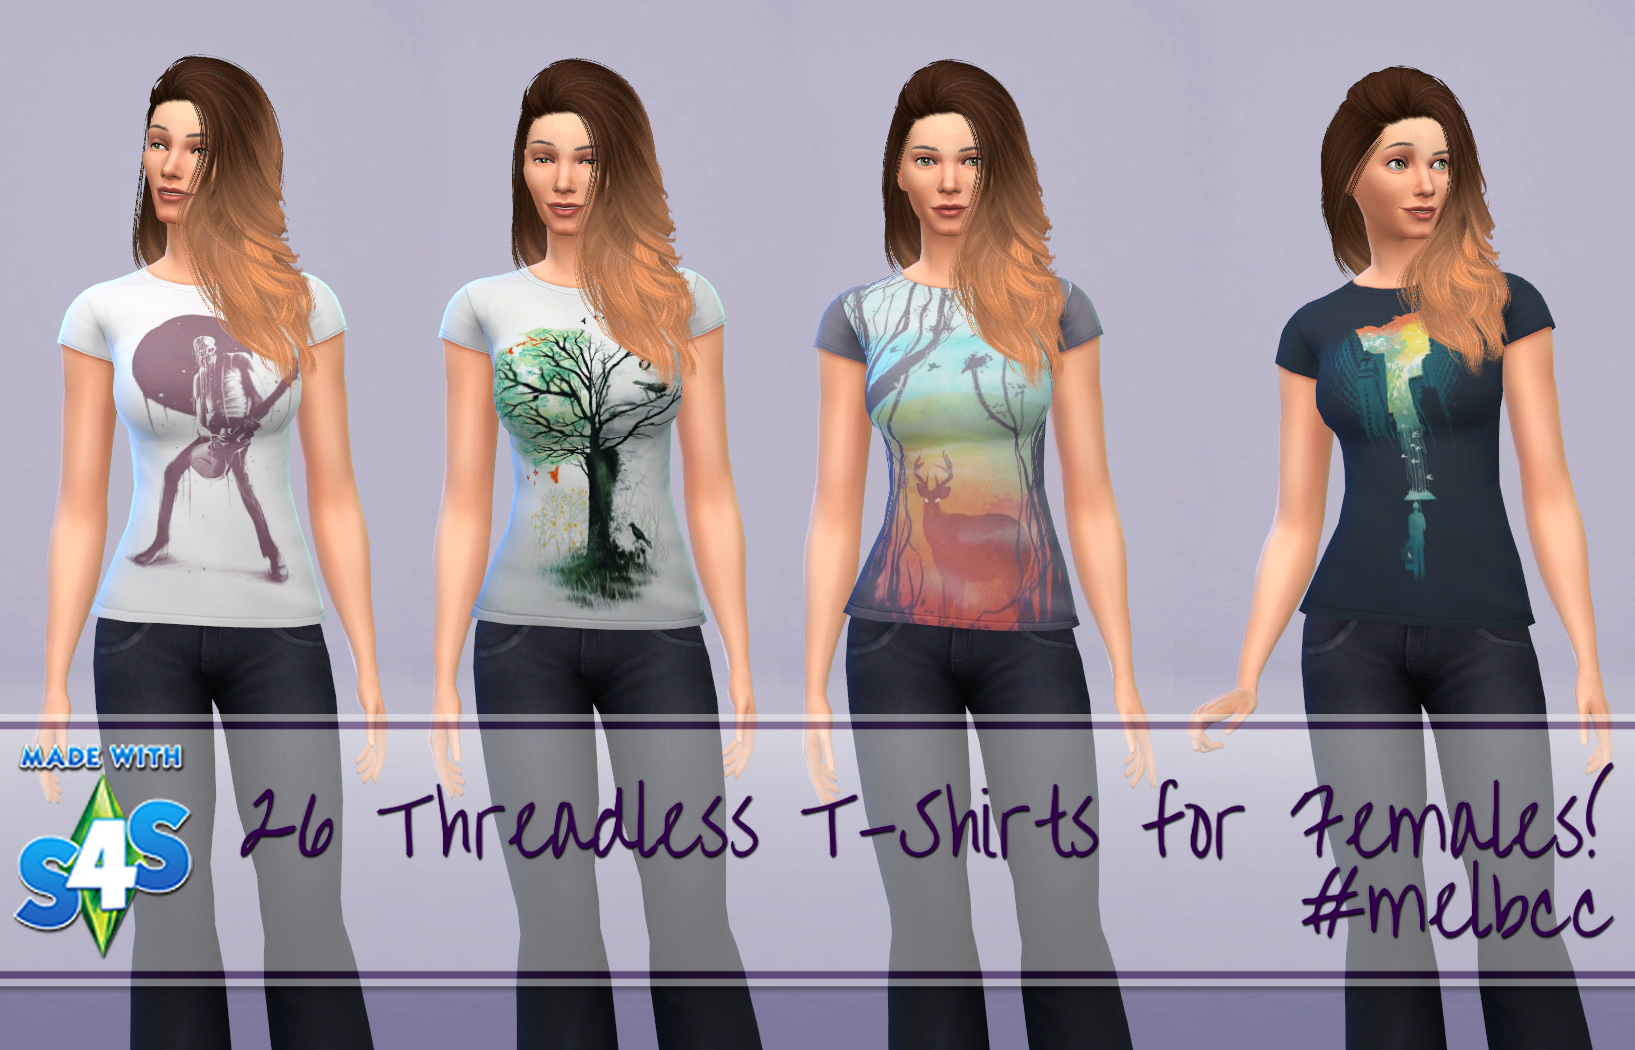 tidligere skrive Comorama Mod The Sims - 26 Threadless T-Shirts for Females!